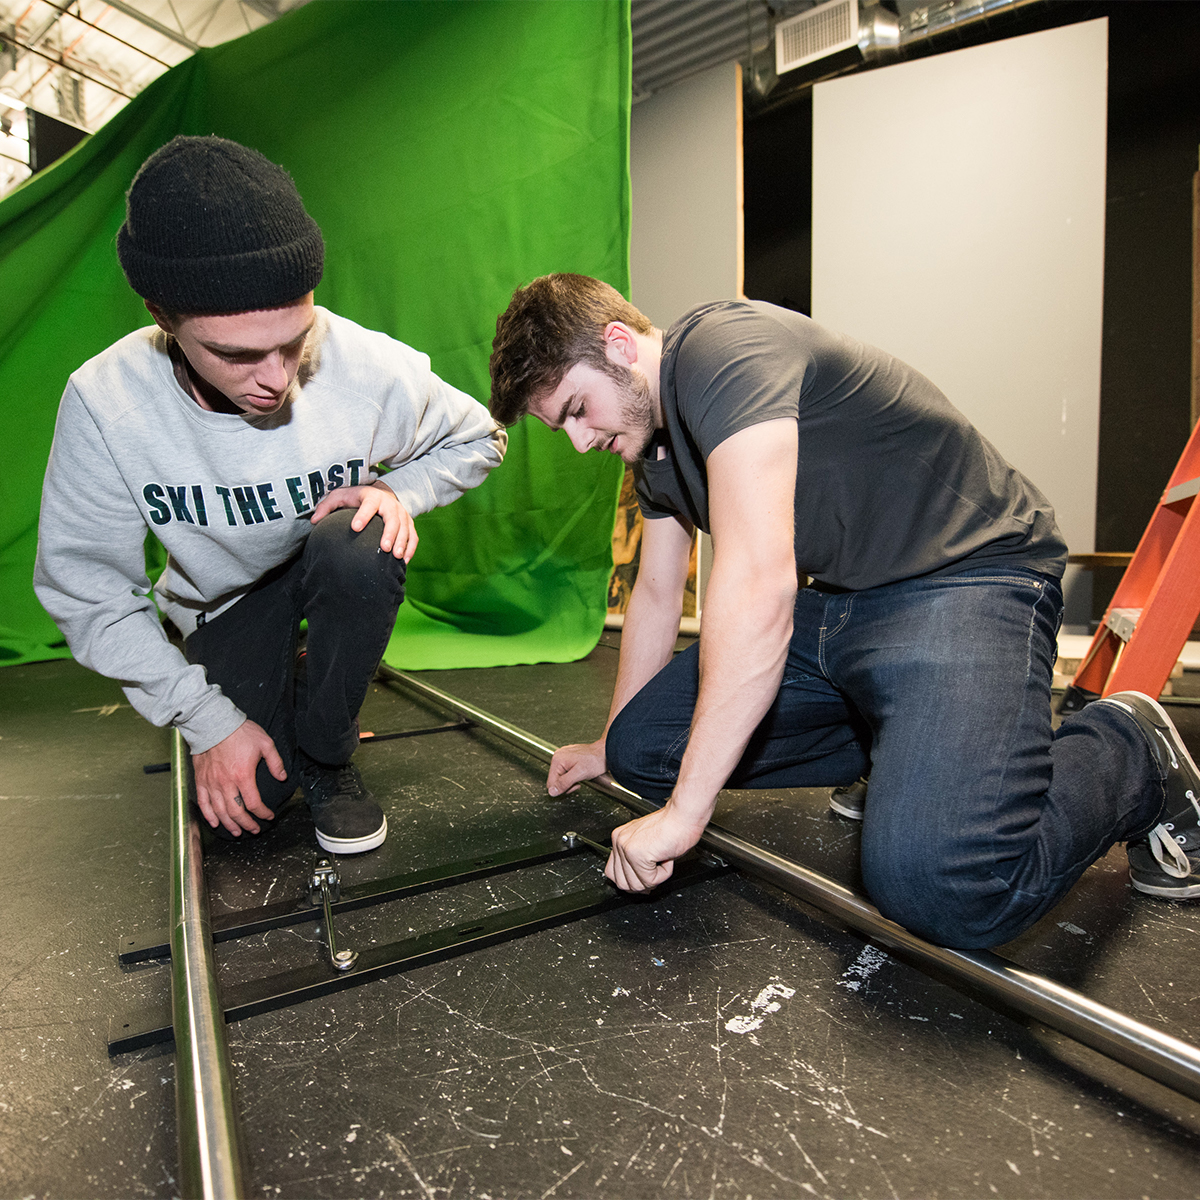 Students working on a broadcast production set